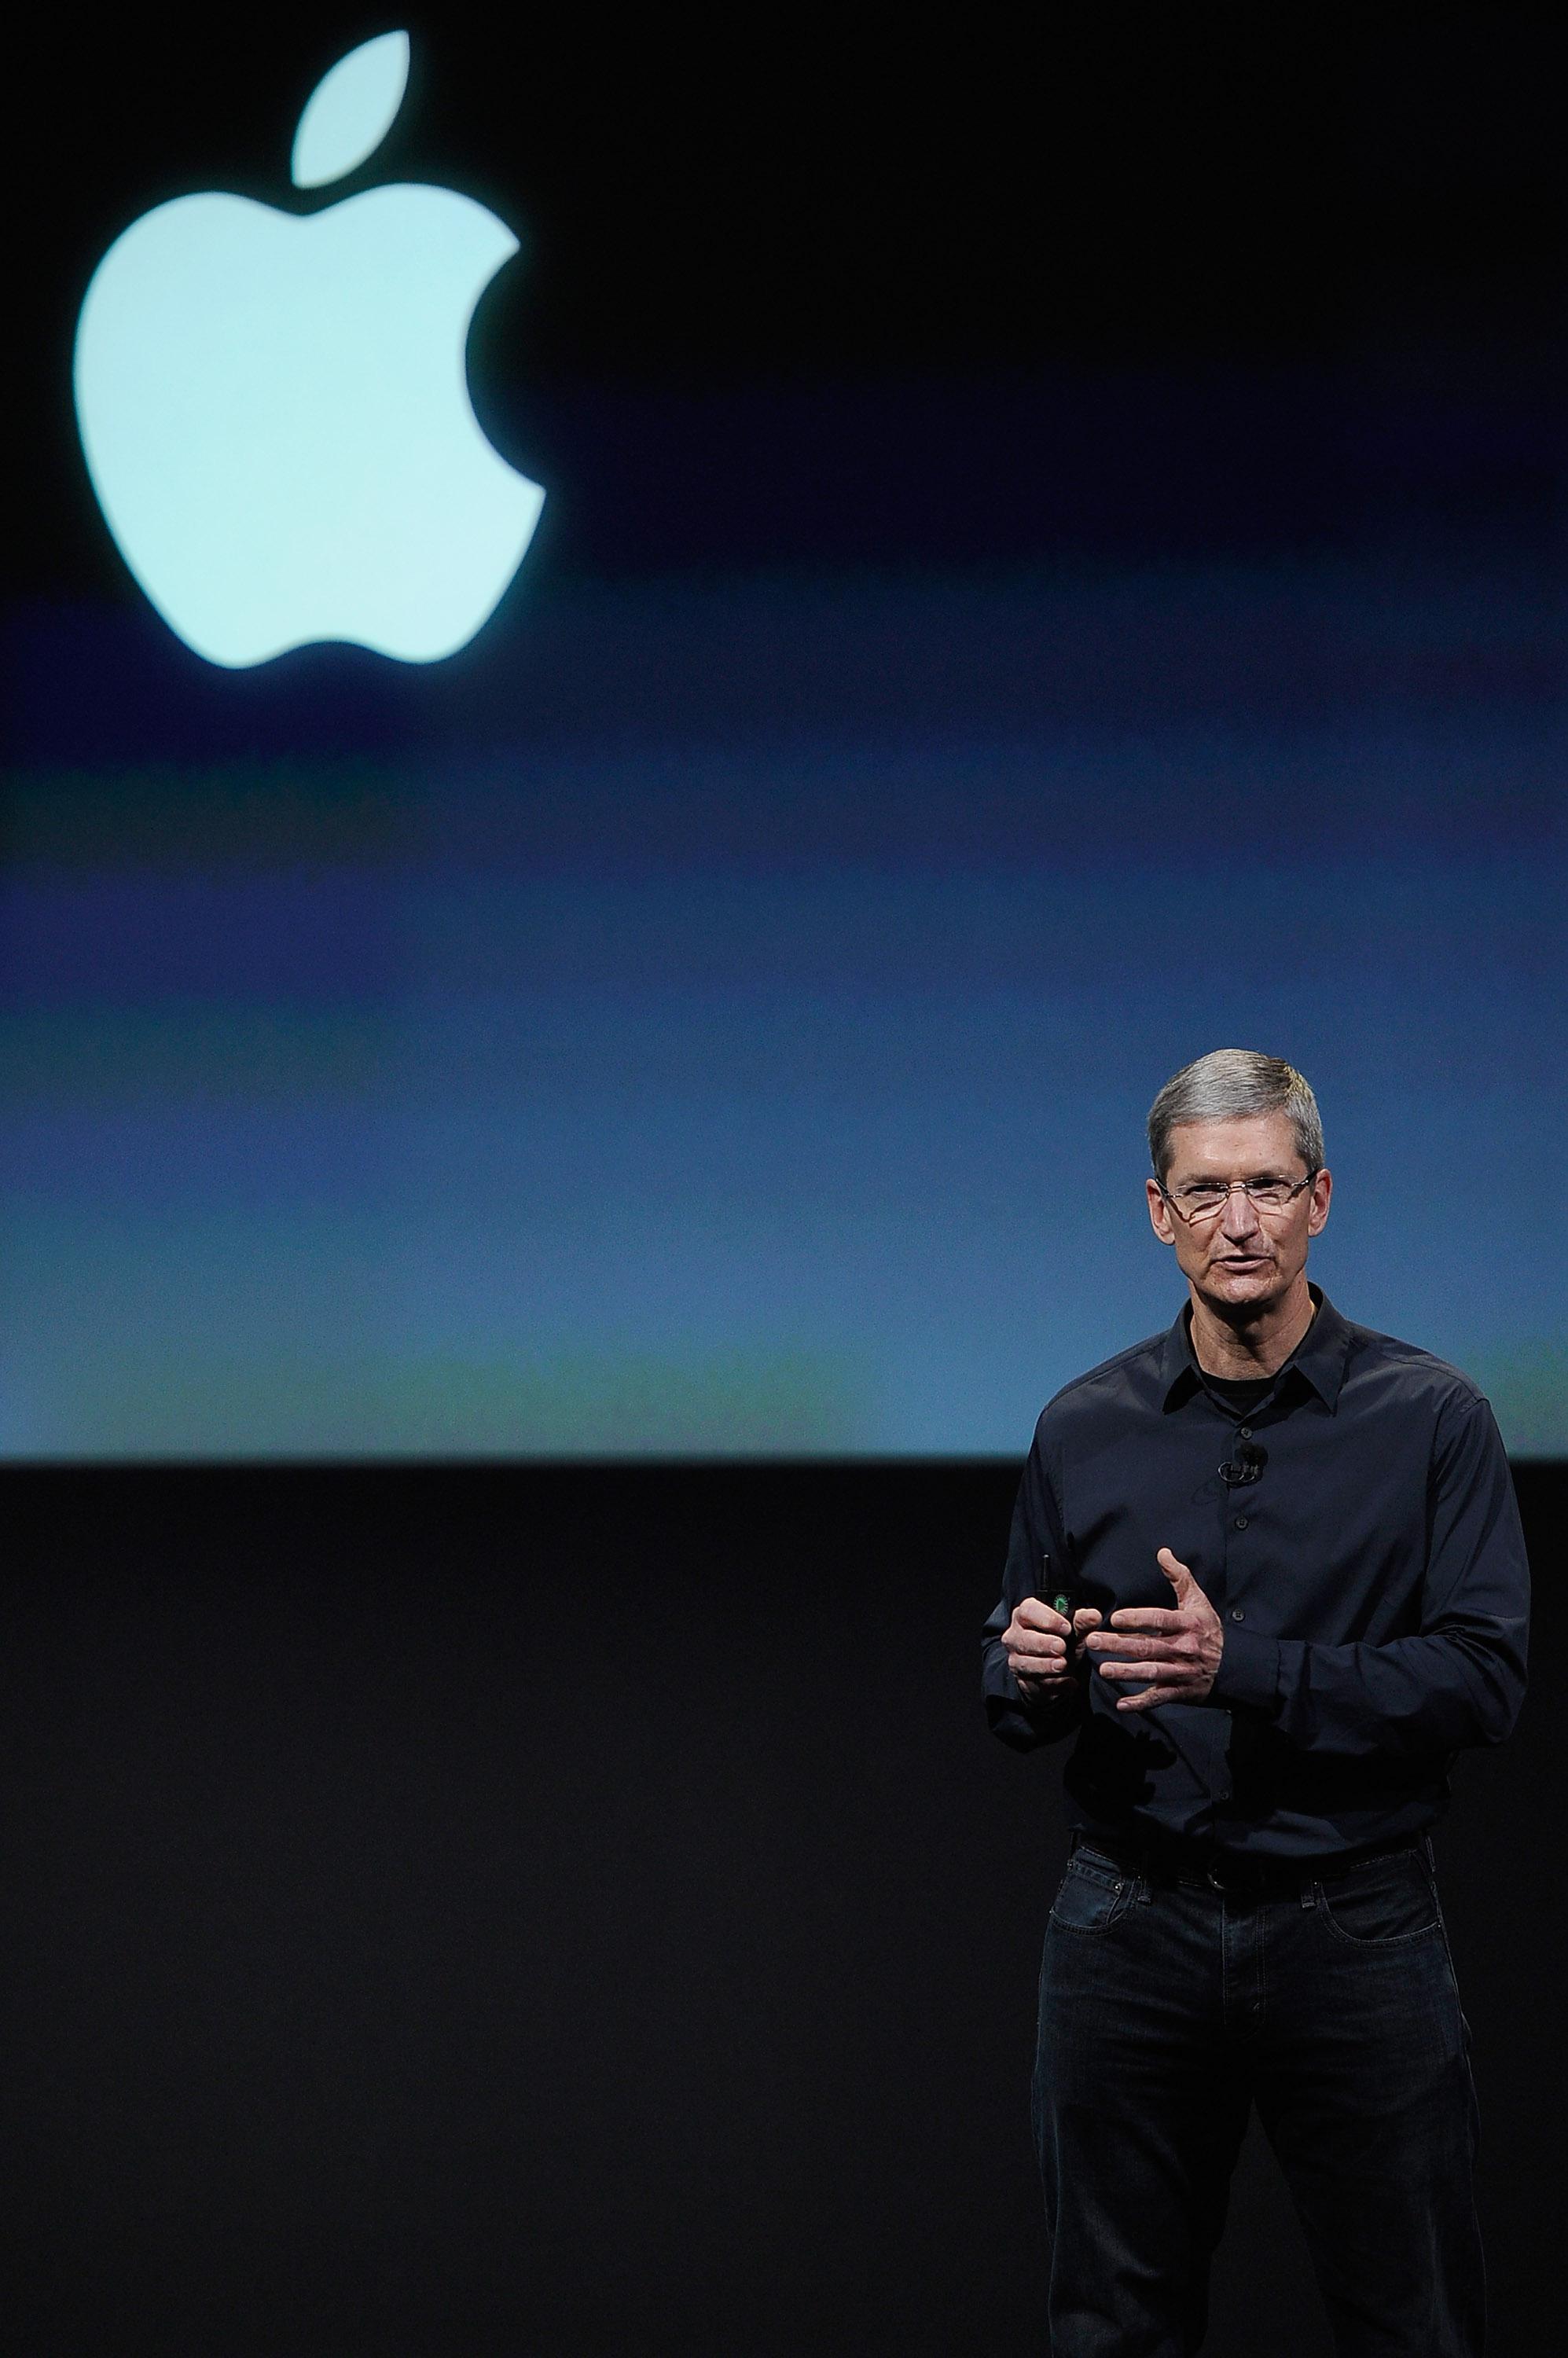 New Apple CEO Tim Cook Introduces iPhone 5